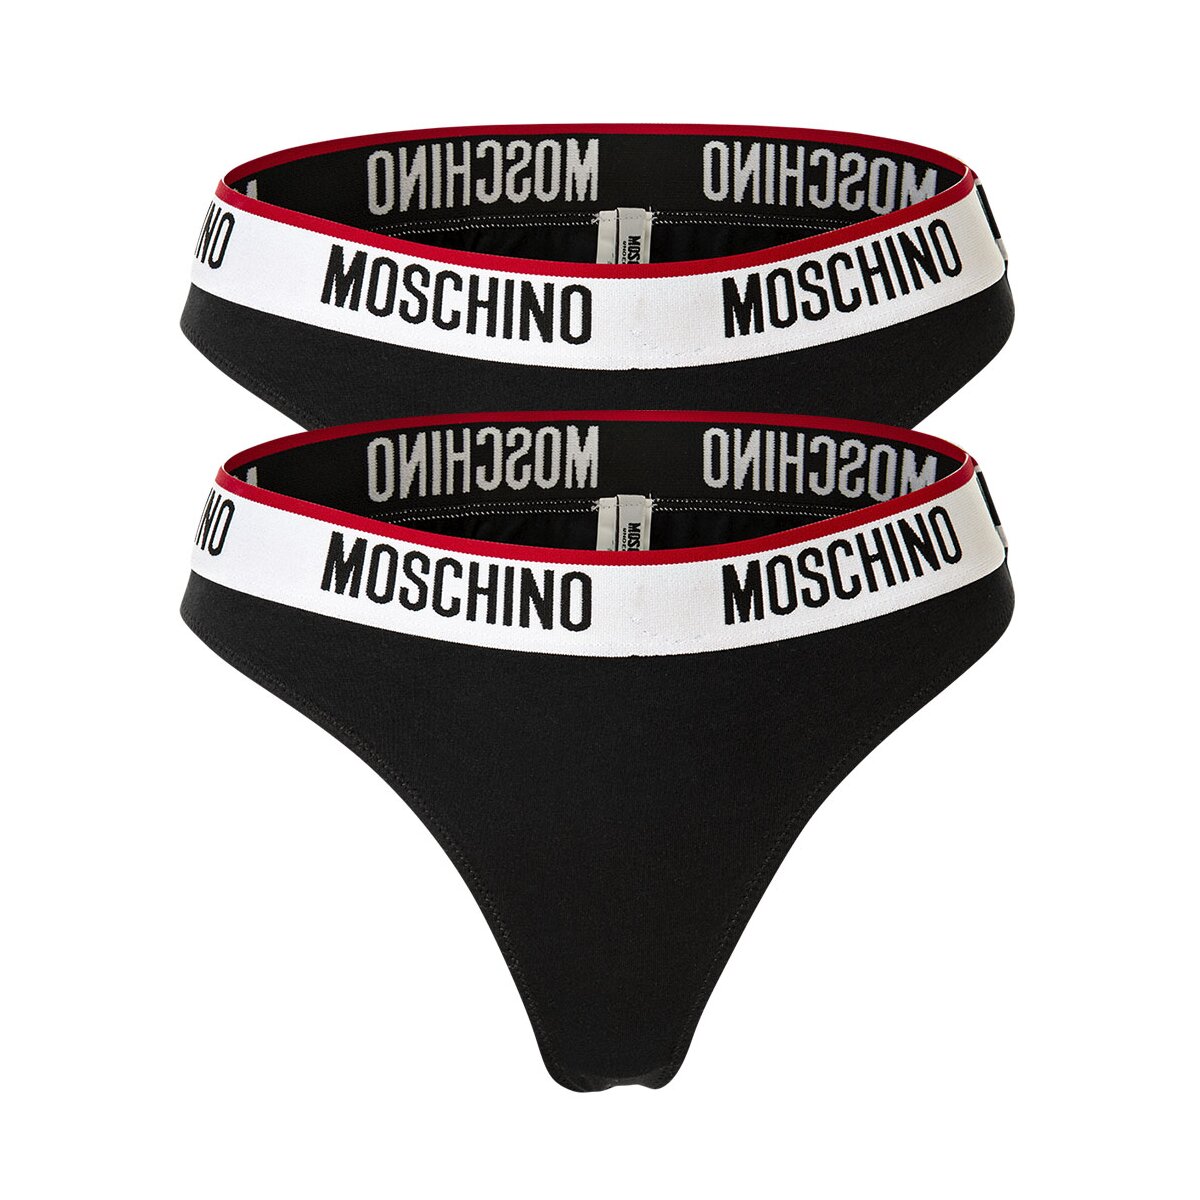 MOSCHINO Strings for Women in Pack of 2 - Cotton Stretch, 49,95 €